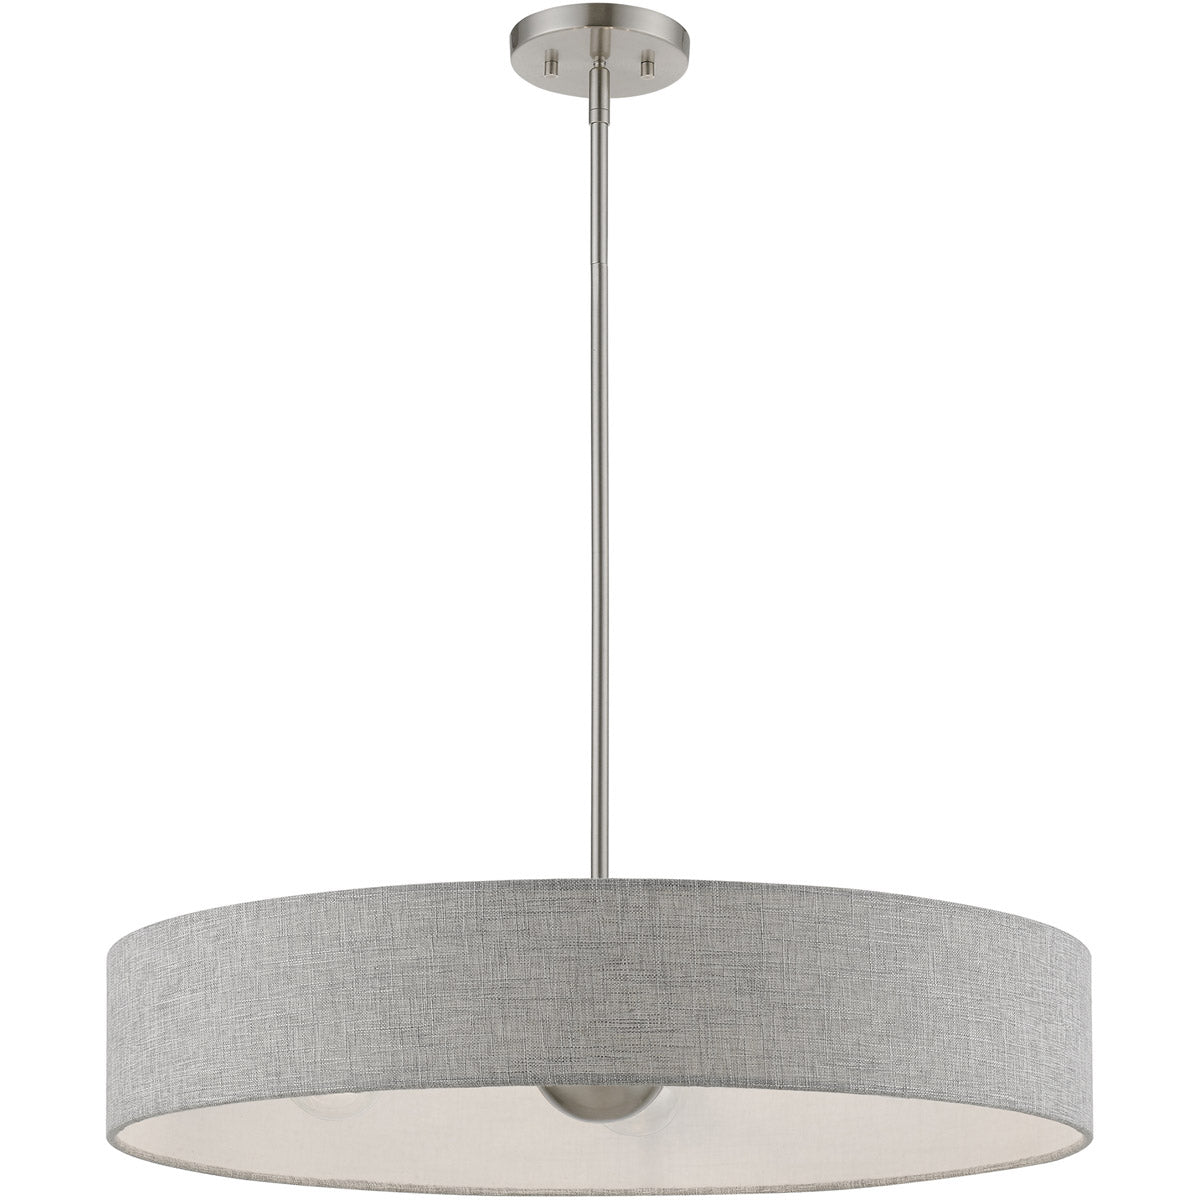 Elmhurst 5 Light 26 inch Pendant-Livex Lighting-LIVEX-46145-91-PendantsBrushed Nickel with Shiny White Accents-5-France and Son